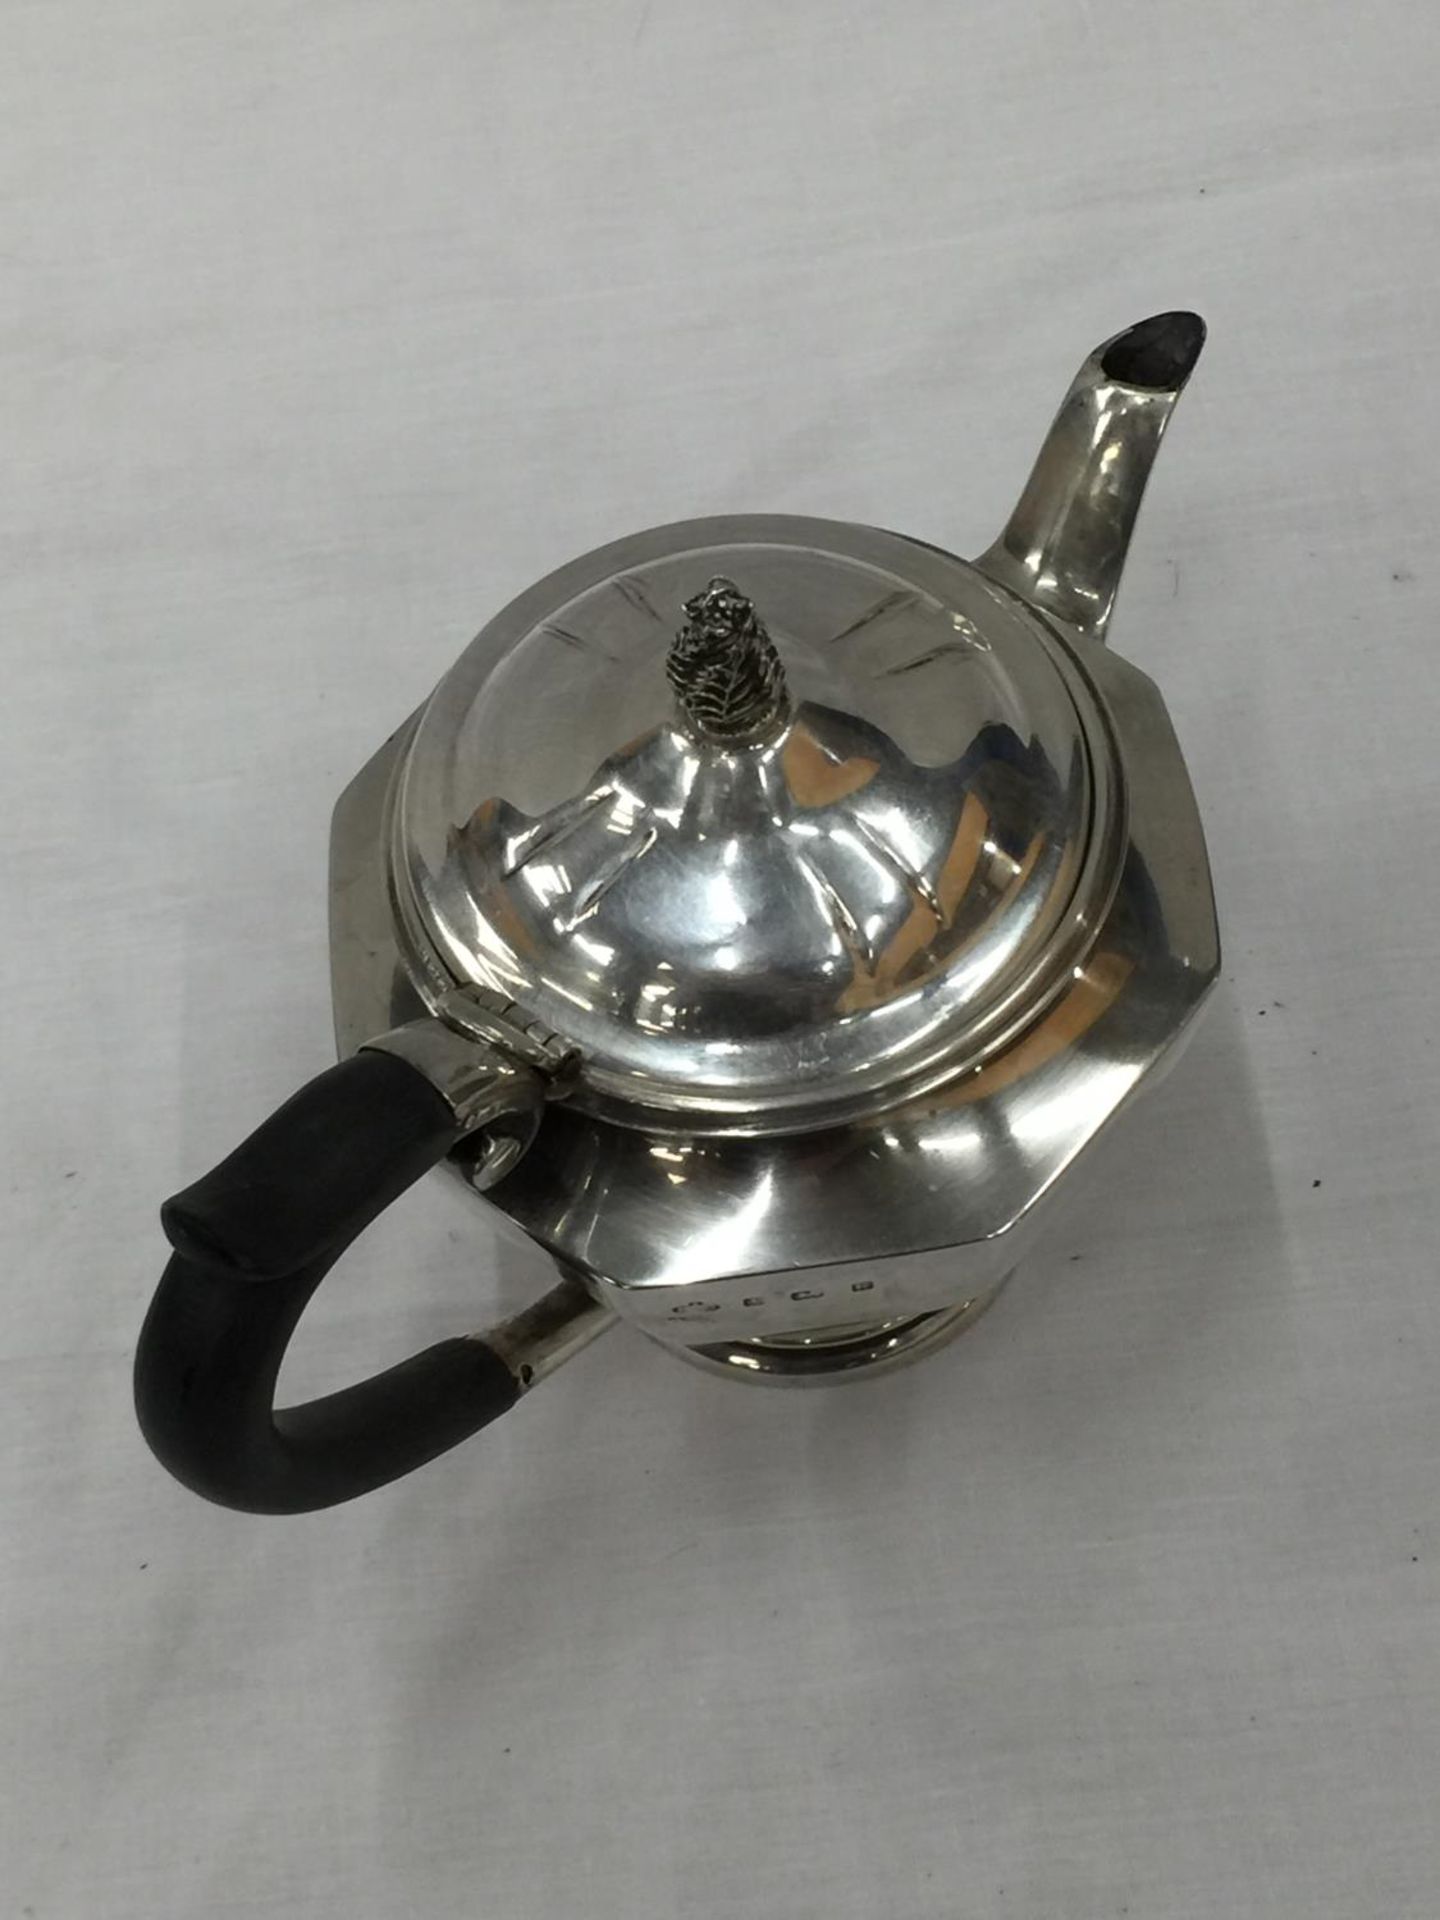 A BIRMINGHAM HALLMARKED SILVER TEAPOT NOT WITH ORIGINAL LID WEIGHT 372 GRAMS - Image 7 of 12